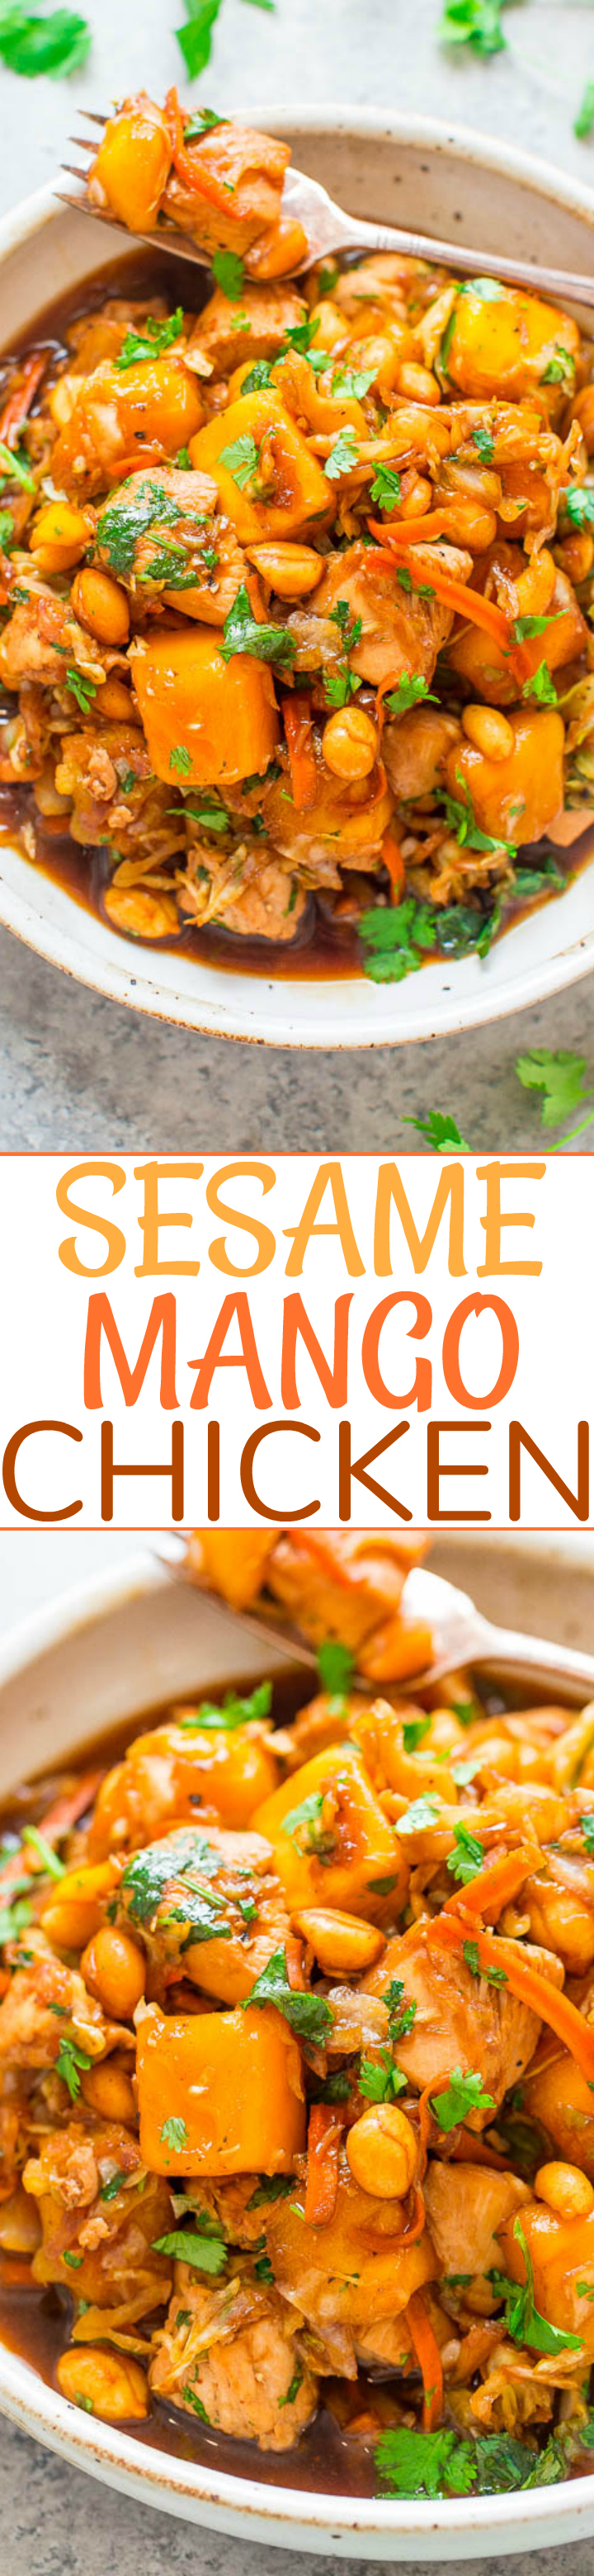 Sesame Mango Chicken - An EASY Asian-inspired recipe with tender sesame chicken, juicy mango, and soy-garlic-ginger infused cabbage and carrots!! One skillet, ready in 15 minutes, and perfect for busy weeknights!!